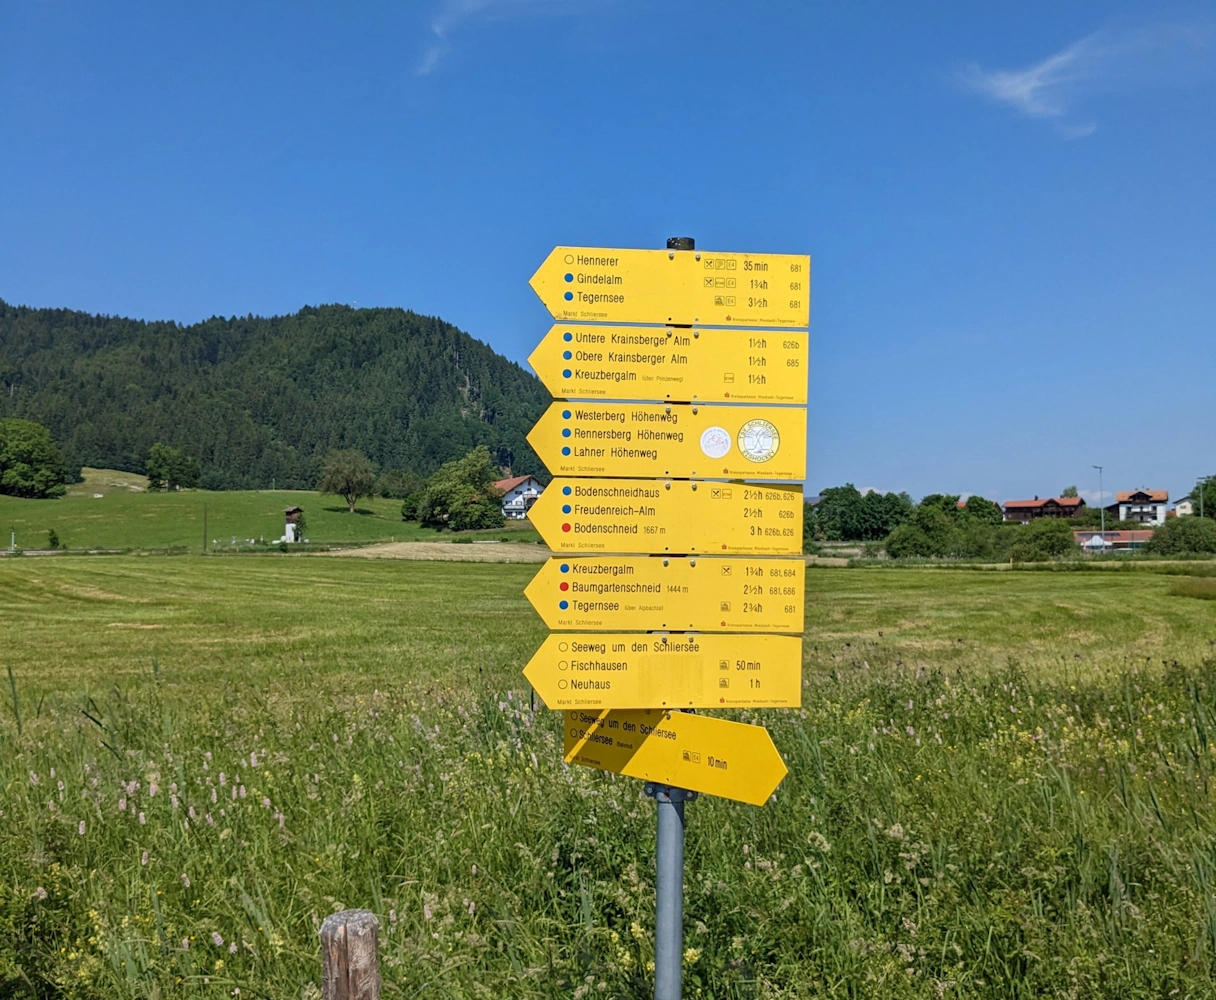 Signs with hiking routes and location information at Schliersee